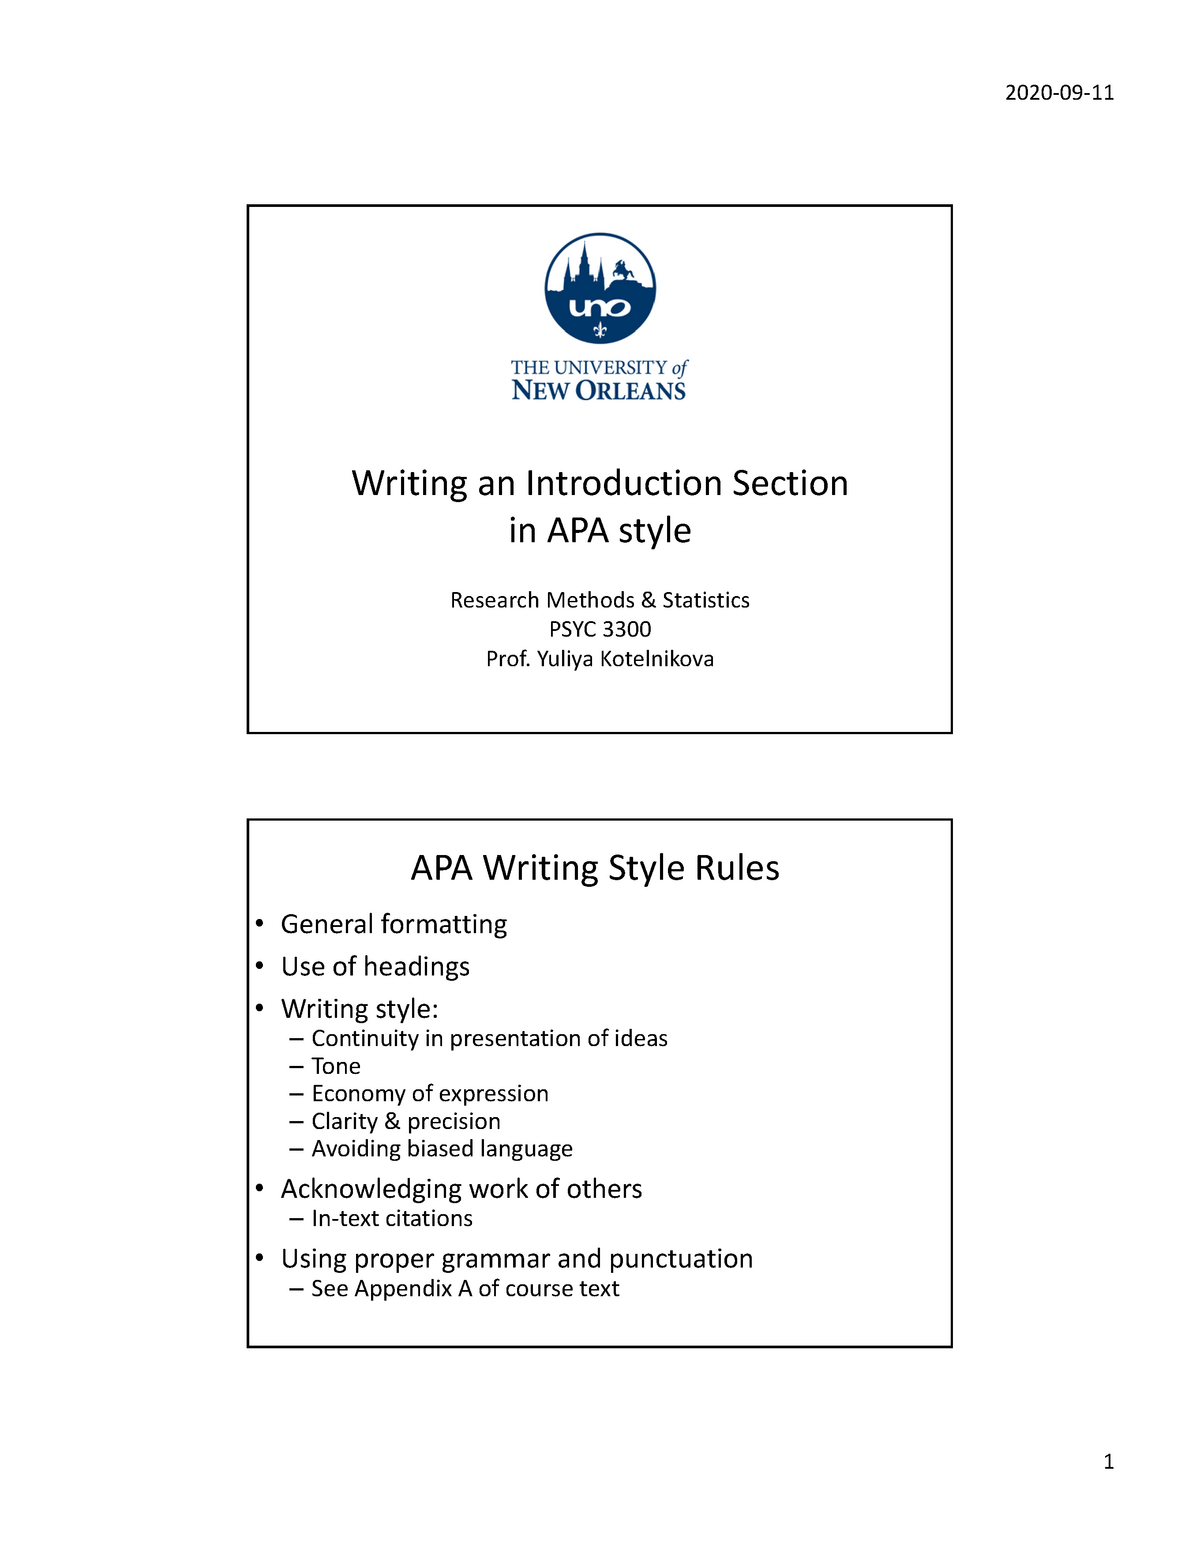 lecture-10-writing-introduction-apa-writing-rules-writing-an